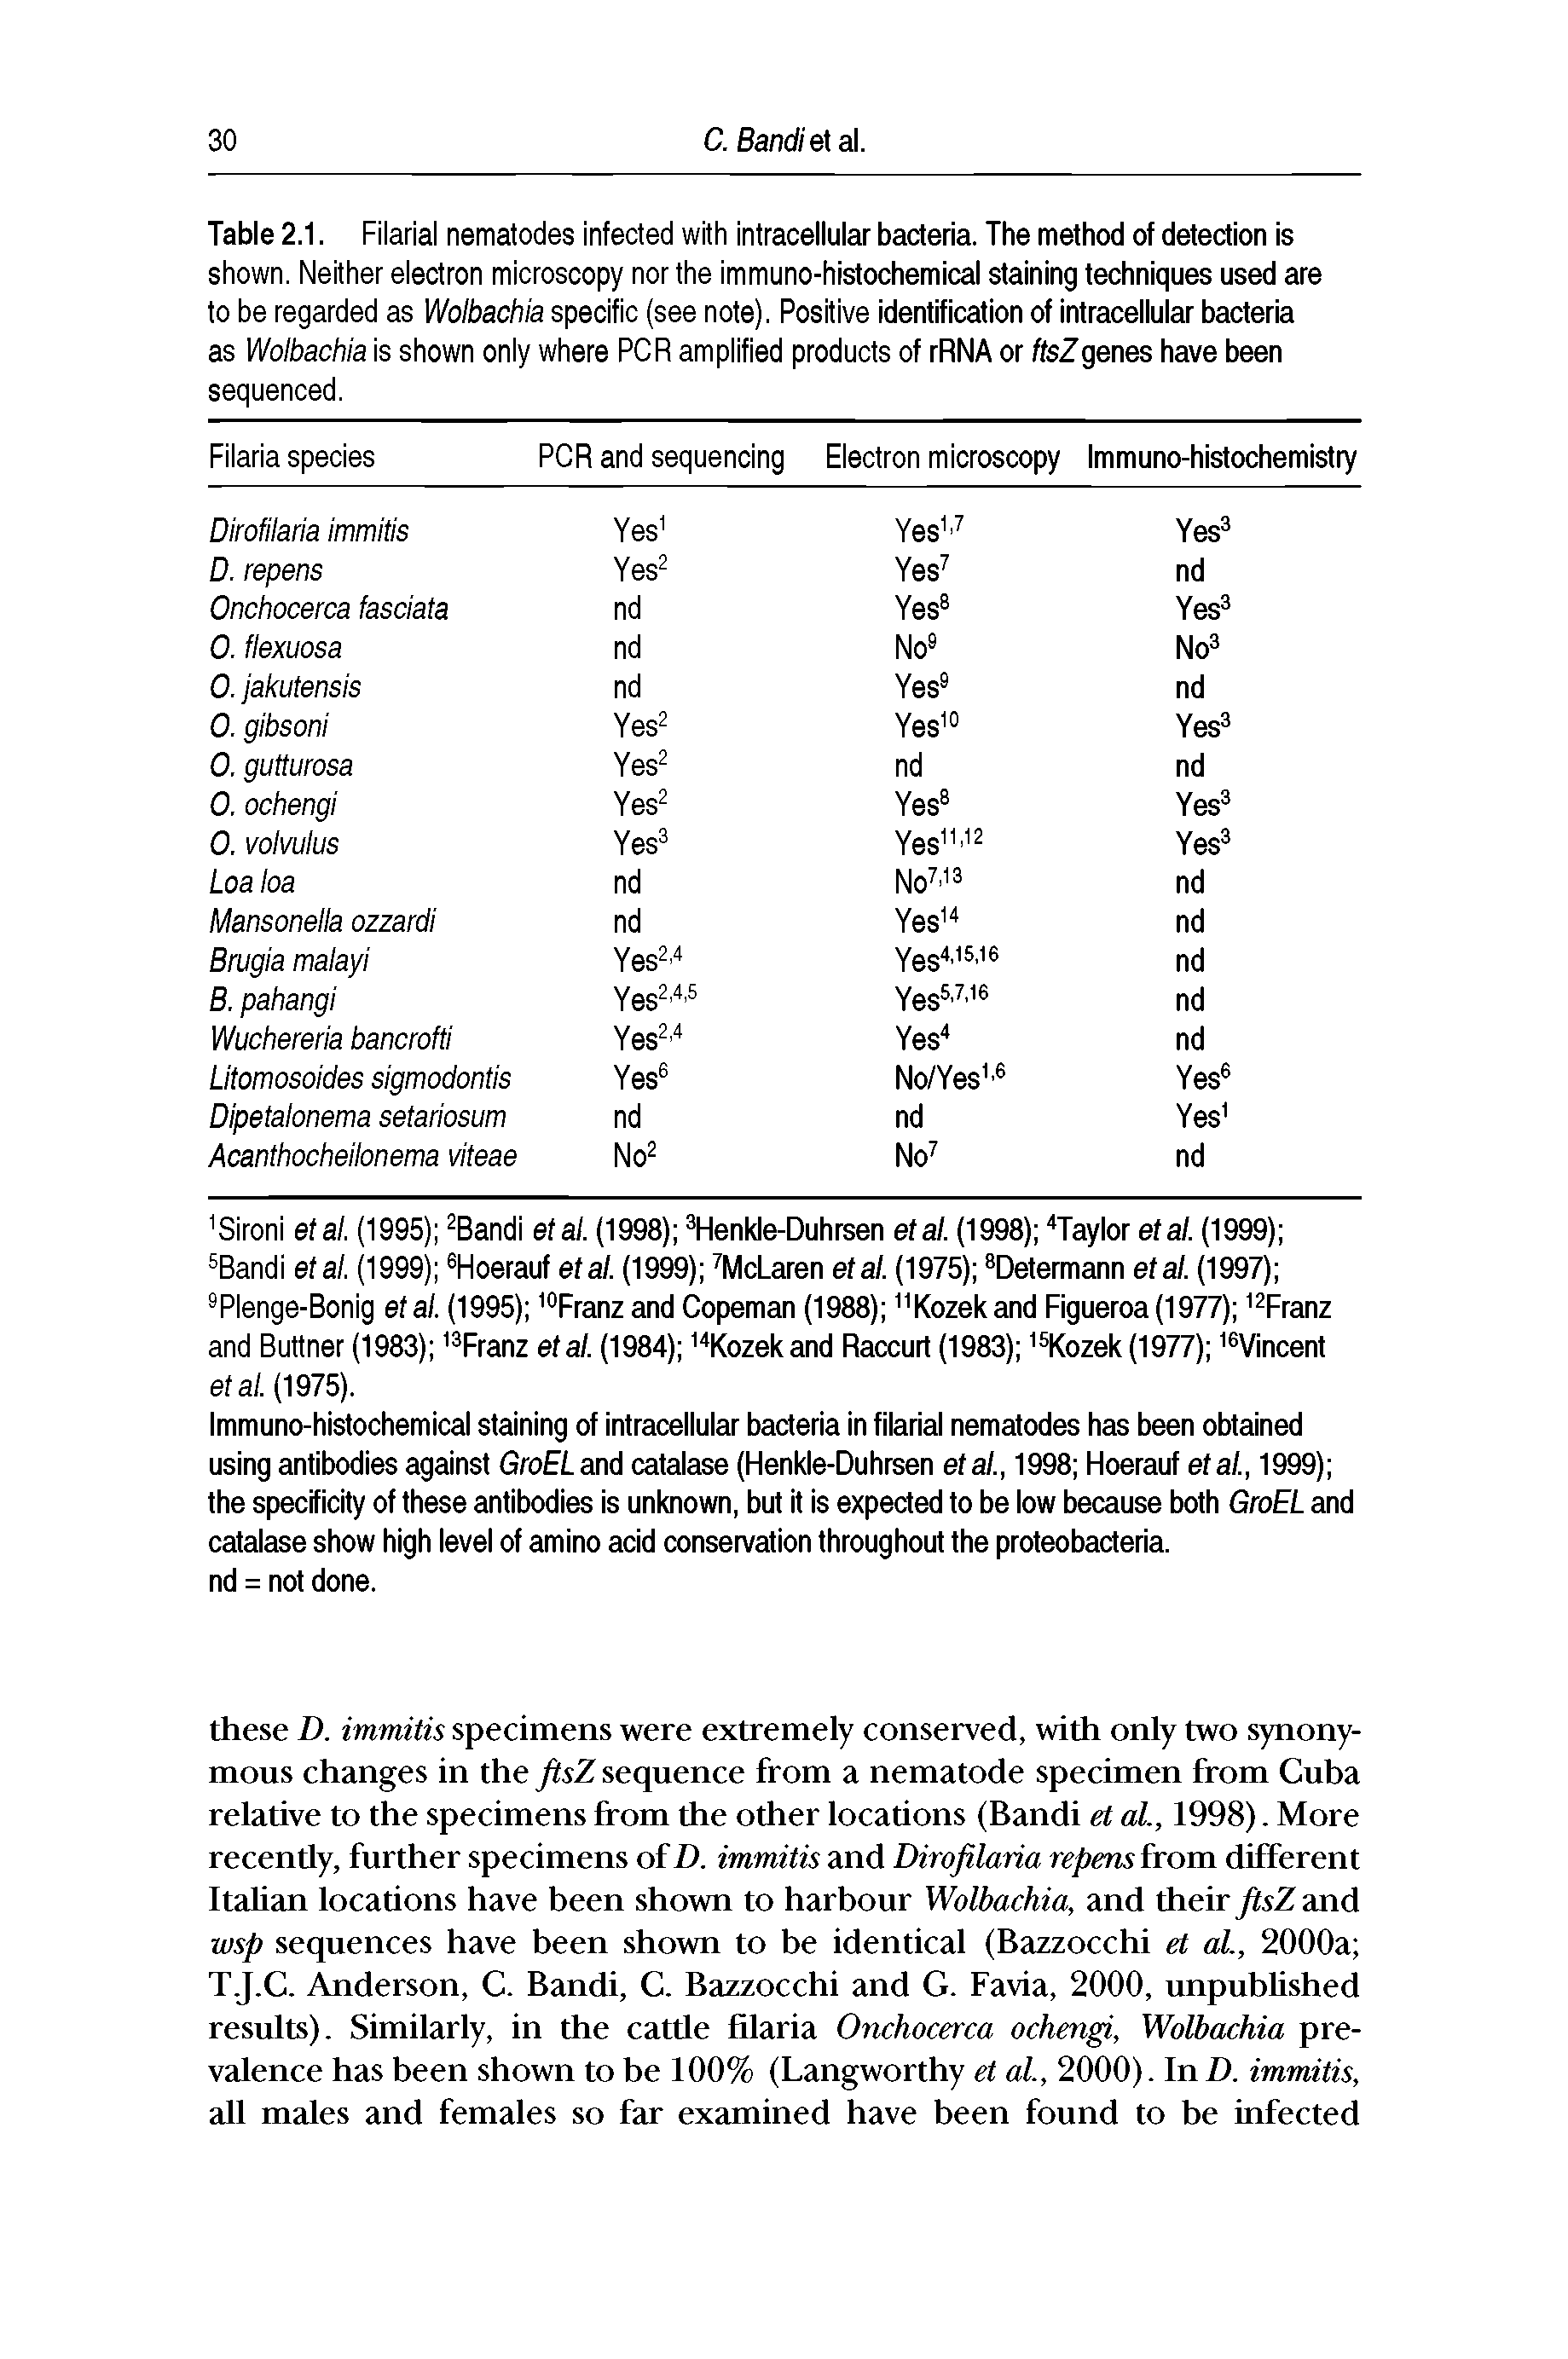 Table 2.1. Filarial nematodes infected with intracellular bacteria. The method of detection is shown. Neither electron microscopy nor the immuno-histochemical staining techniques used are to be regarded as Wolbachia specific (see note). Positive identification of intracellular bacteria as Wolbachia is shown only where PCR amplified products of rRNA or ftsZ genes have been sequenced. ...